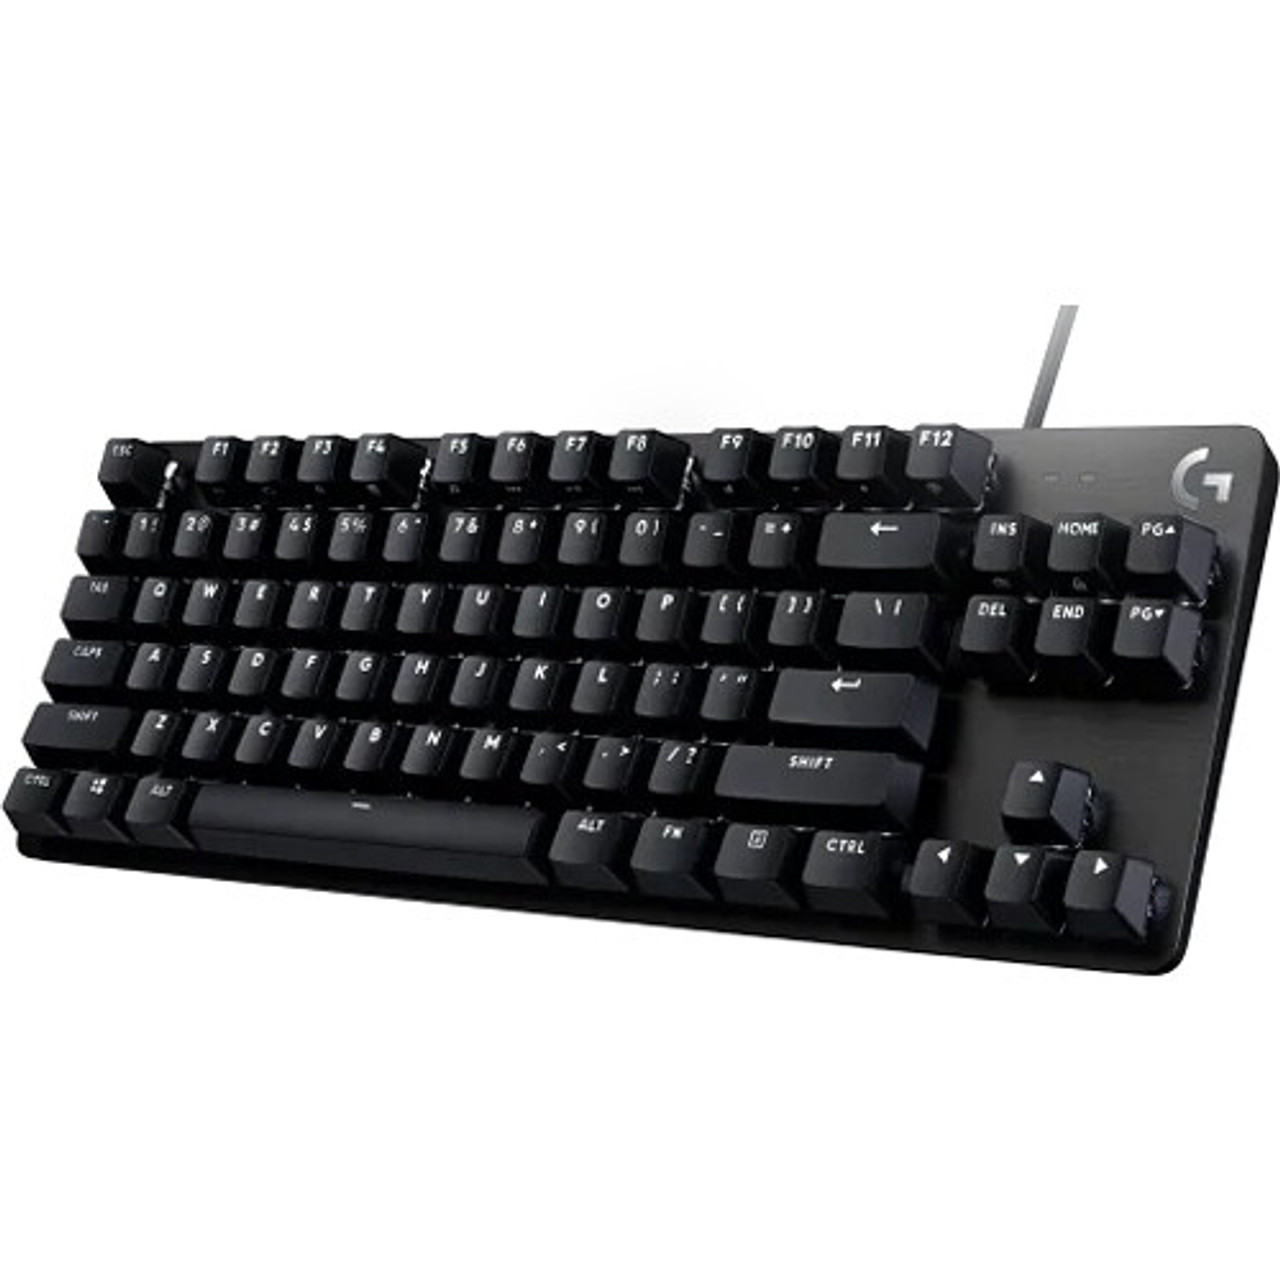 Logitech G413 (920008300) Wired Gaming Keyboard for sale online